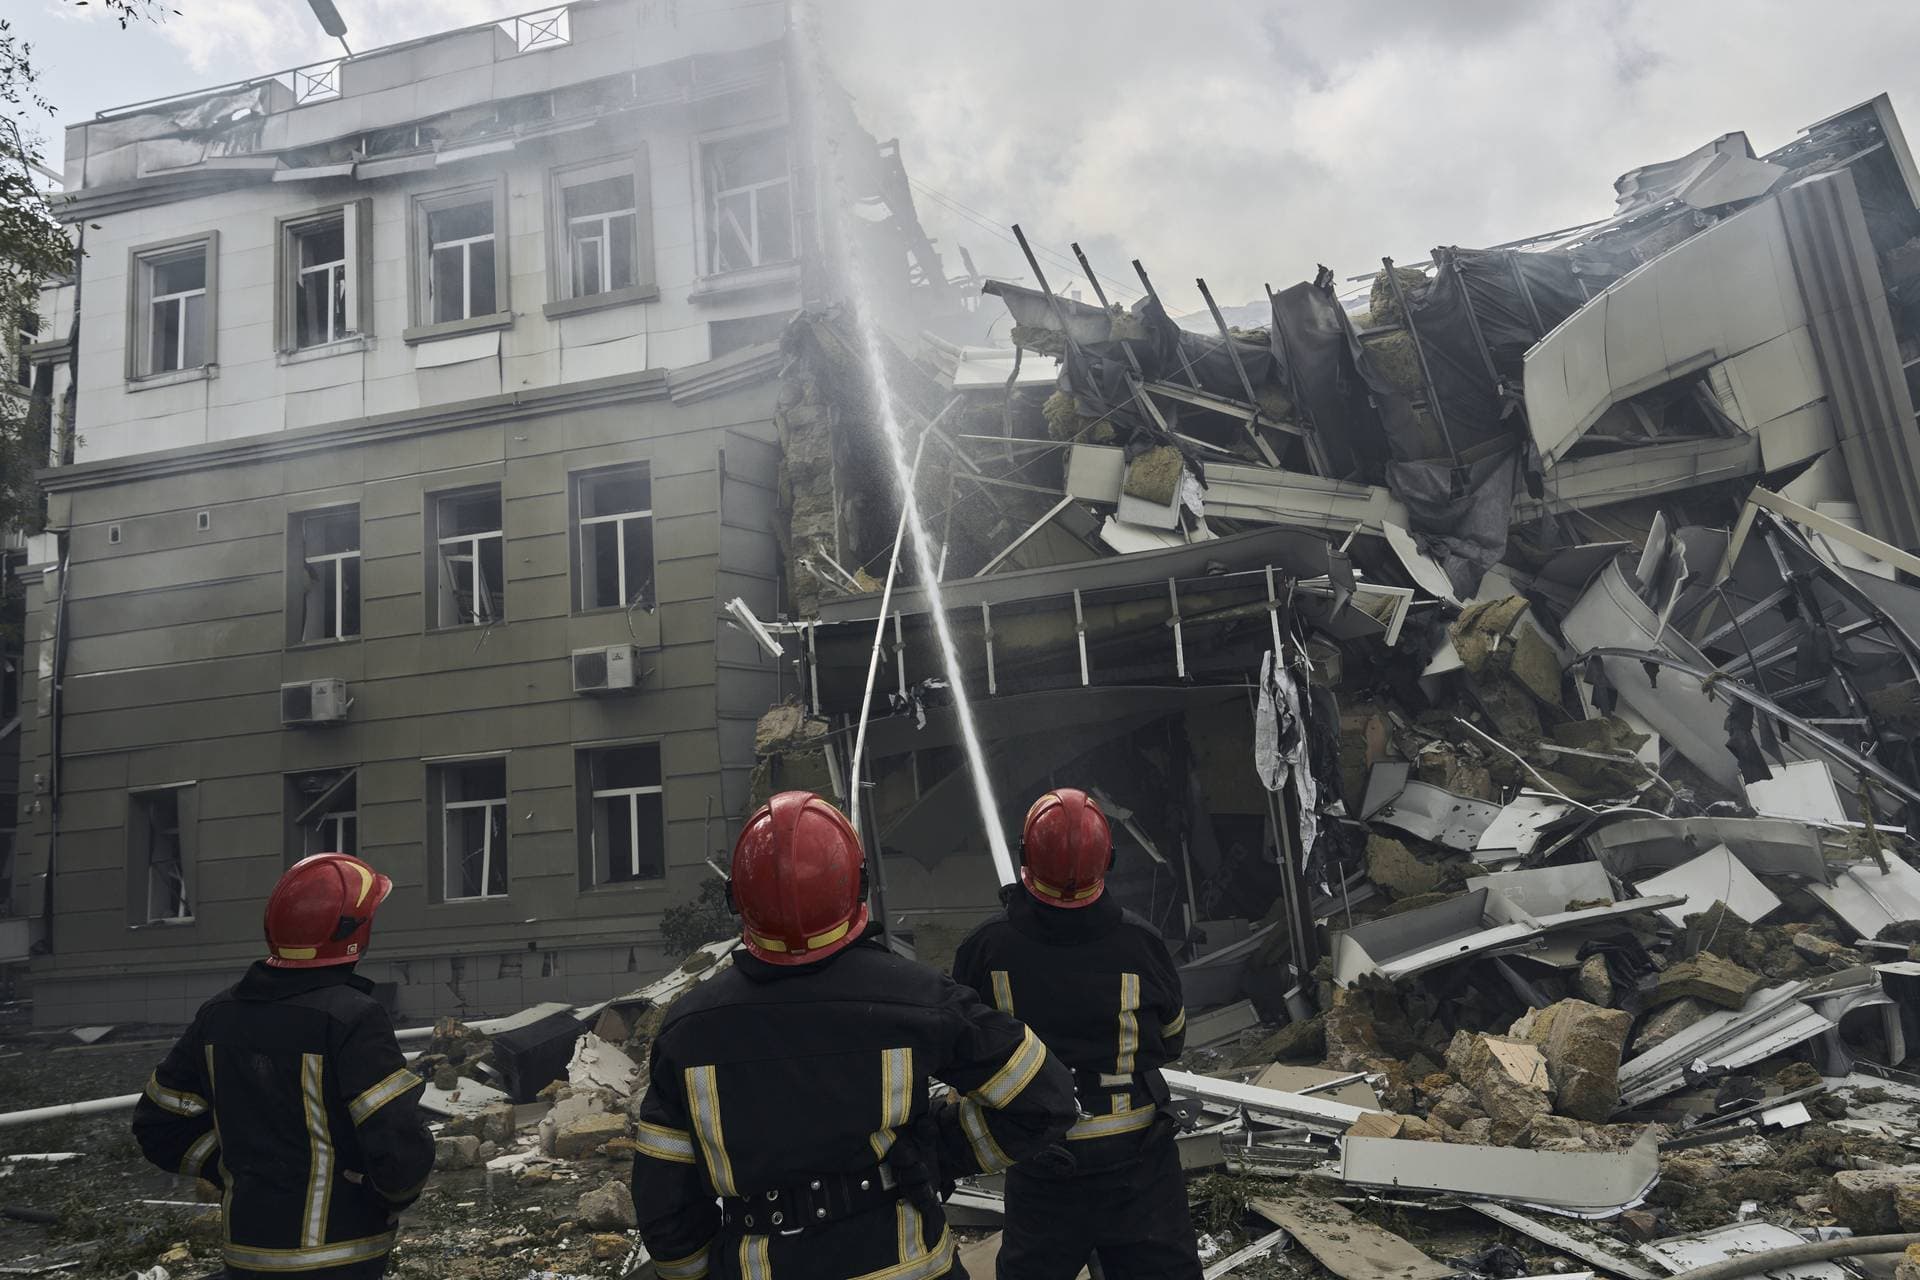 Emergency service personnel work at the site of a destroyed building after a Russian attack in Odesa